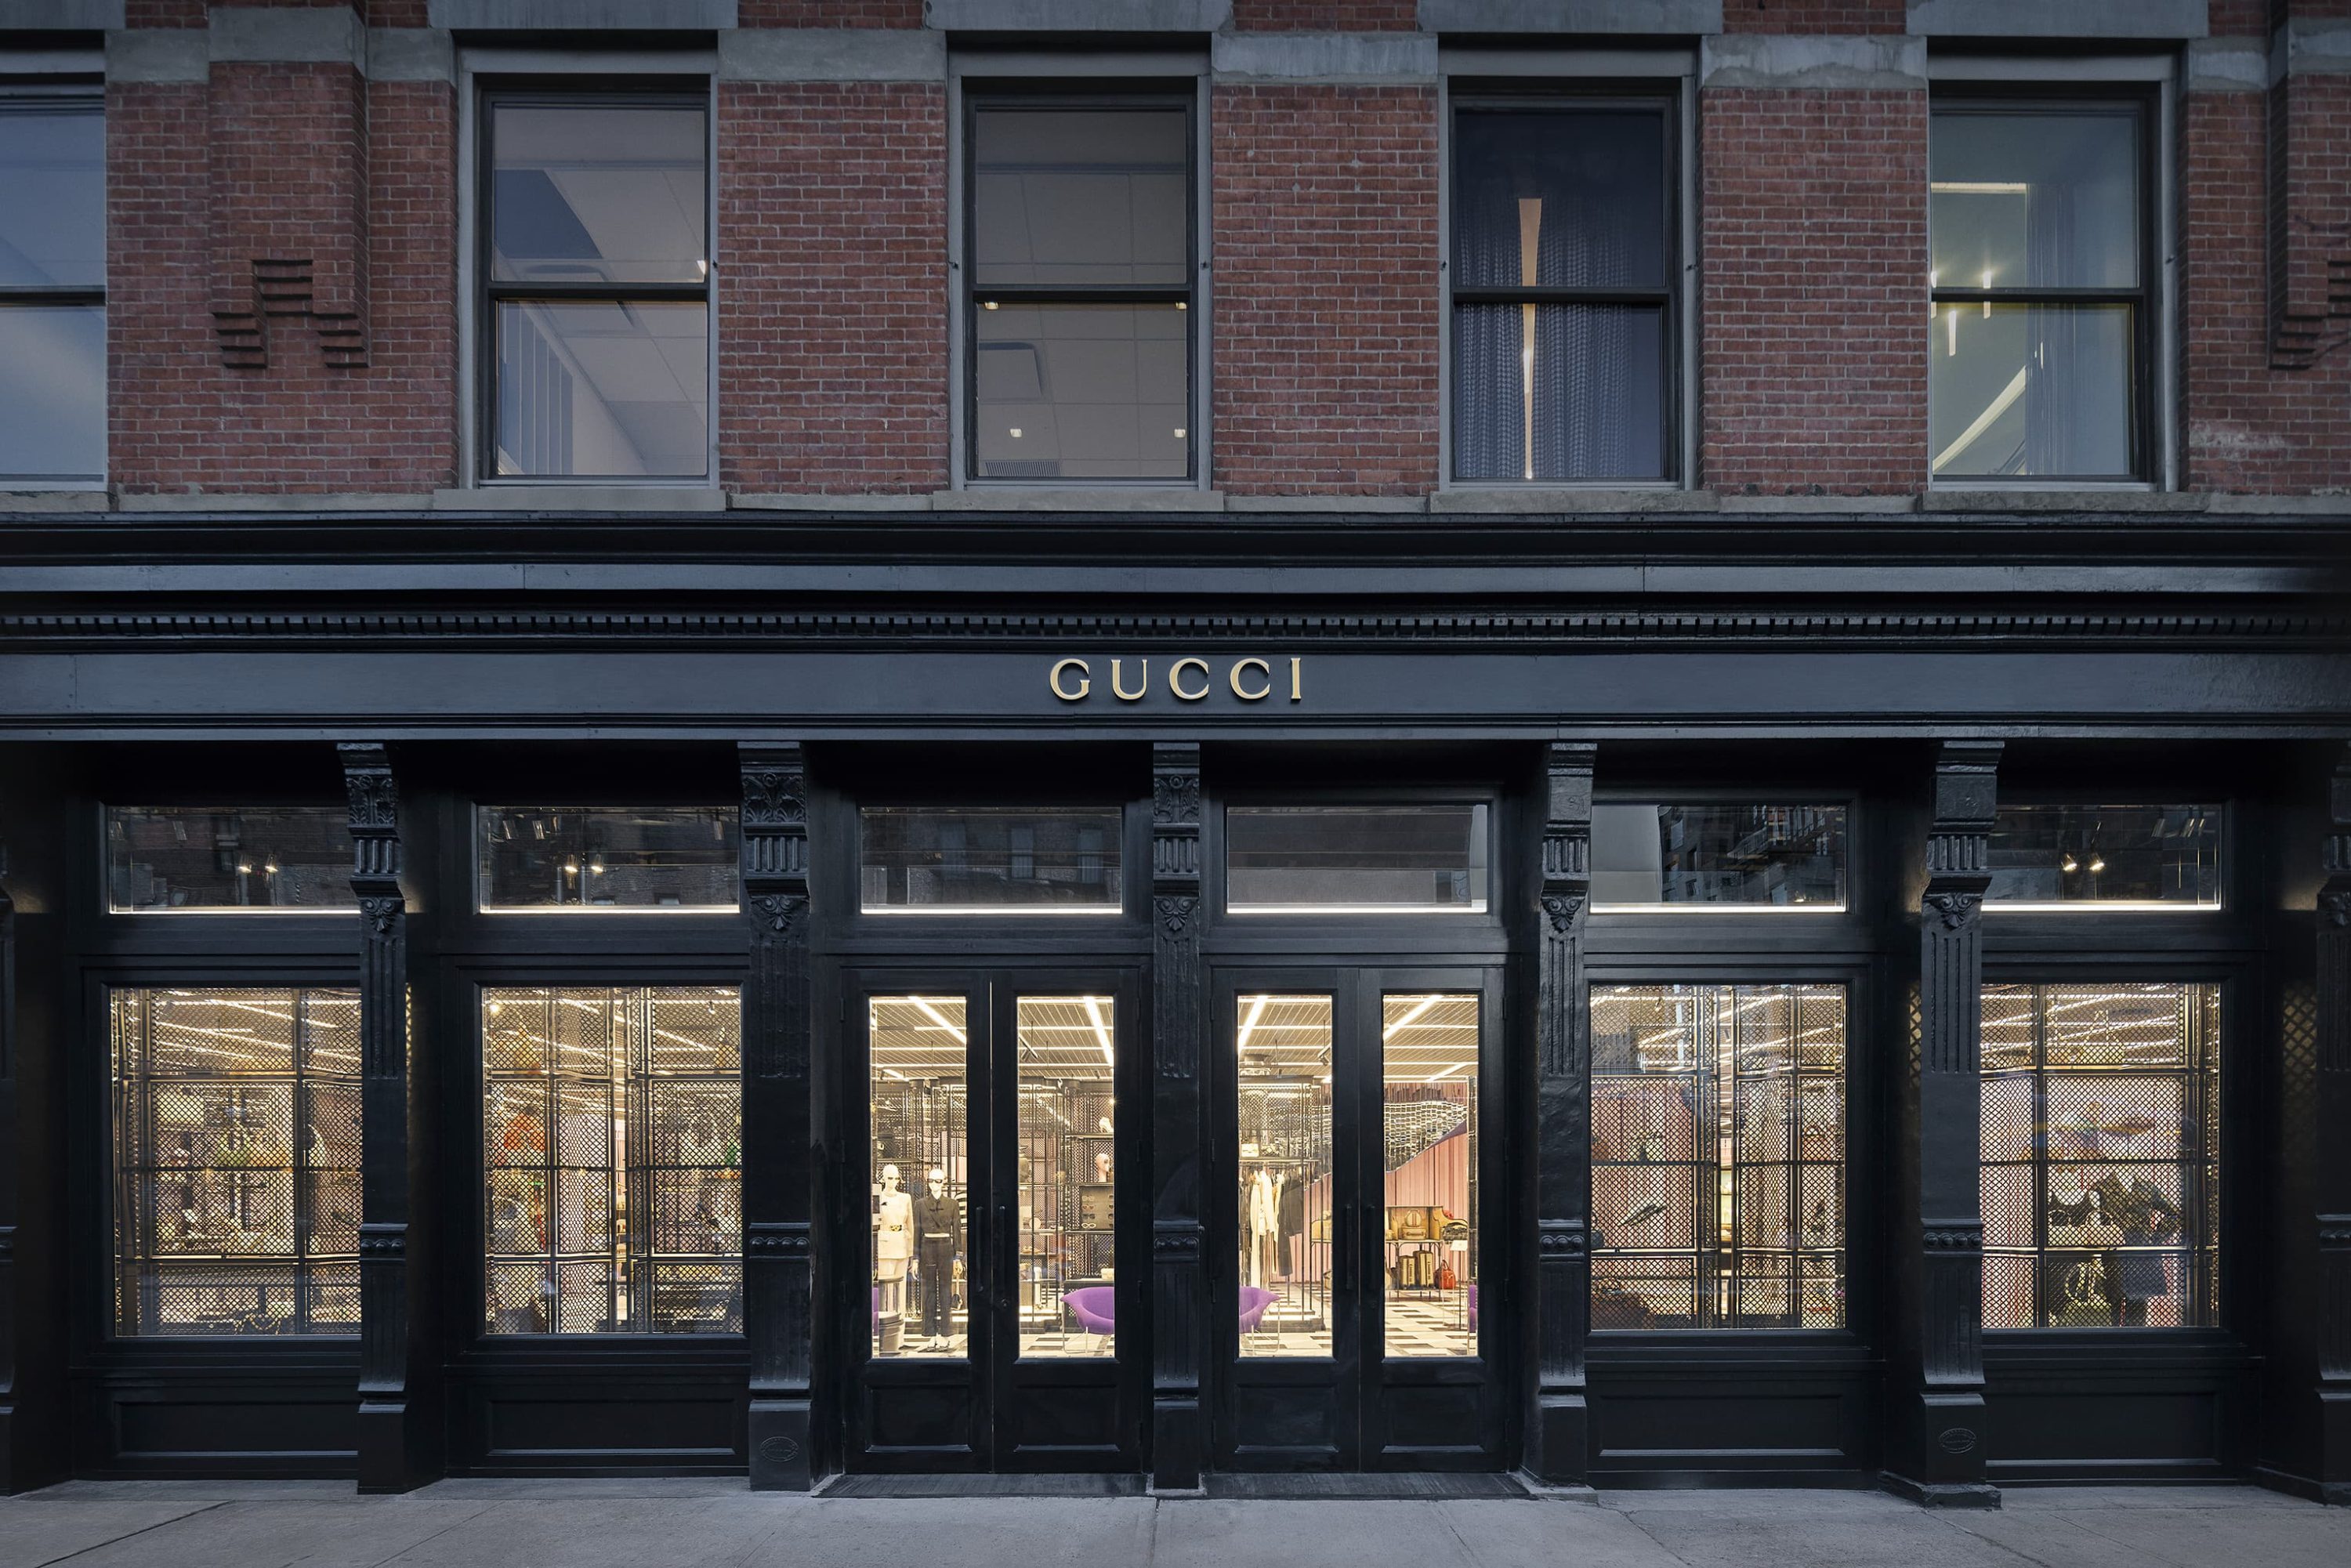 Retail  Inside the new Gucci store in SoHo, New York [PHOTOS